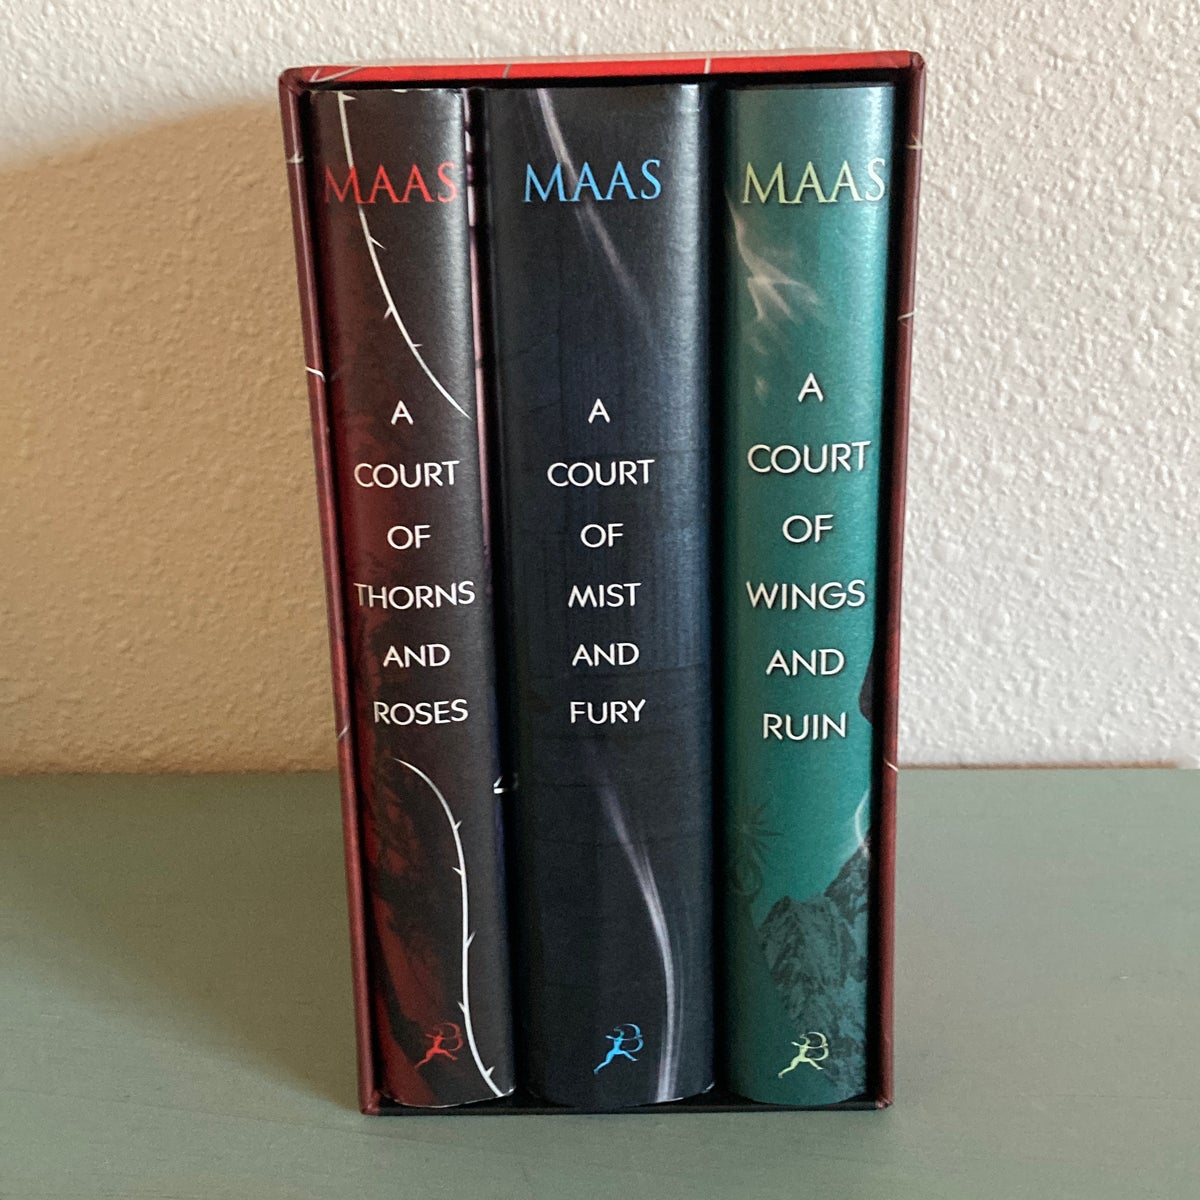 A Court of Thorns and Roses Hardcover Box Set